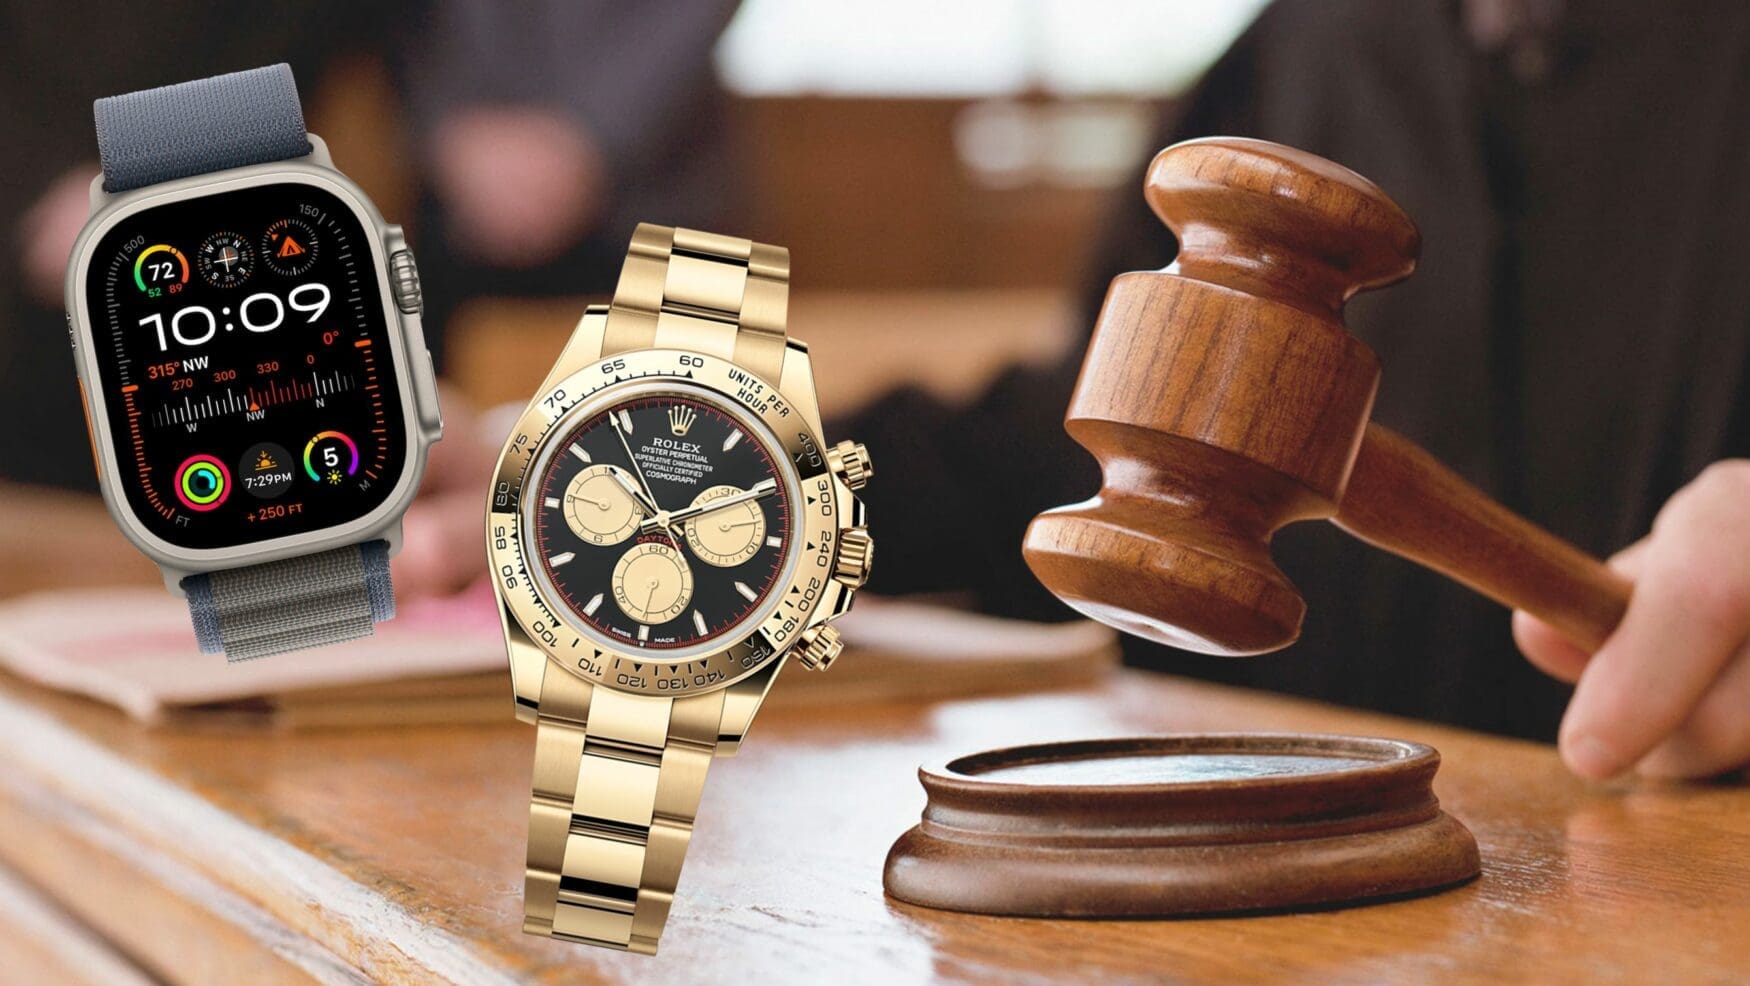 Rolex and Apple find themselves in hot water